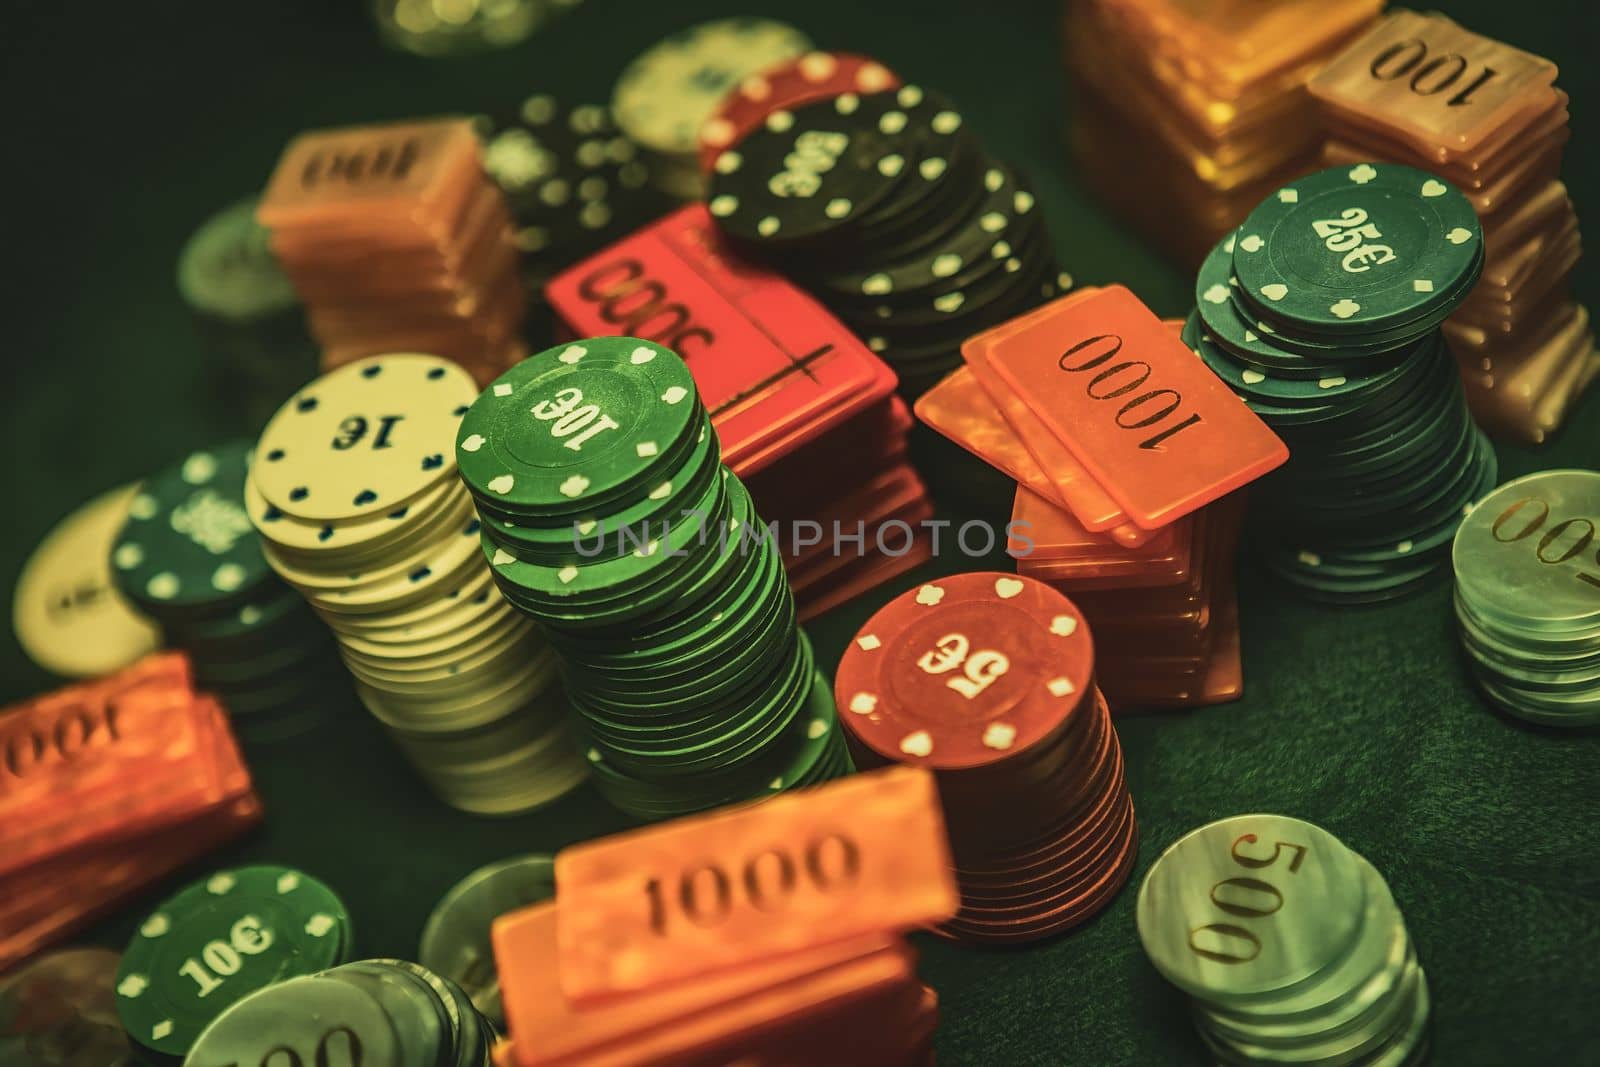 Poker chips are stacked on a green textured table smoke of cigars fills the room by pippocarlot